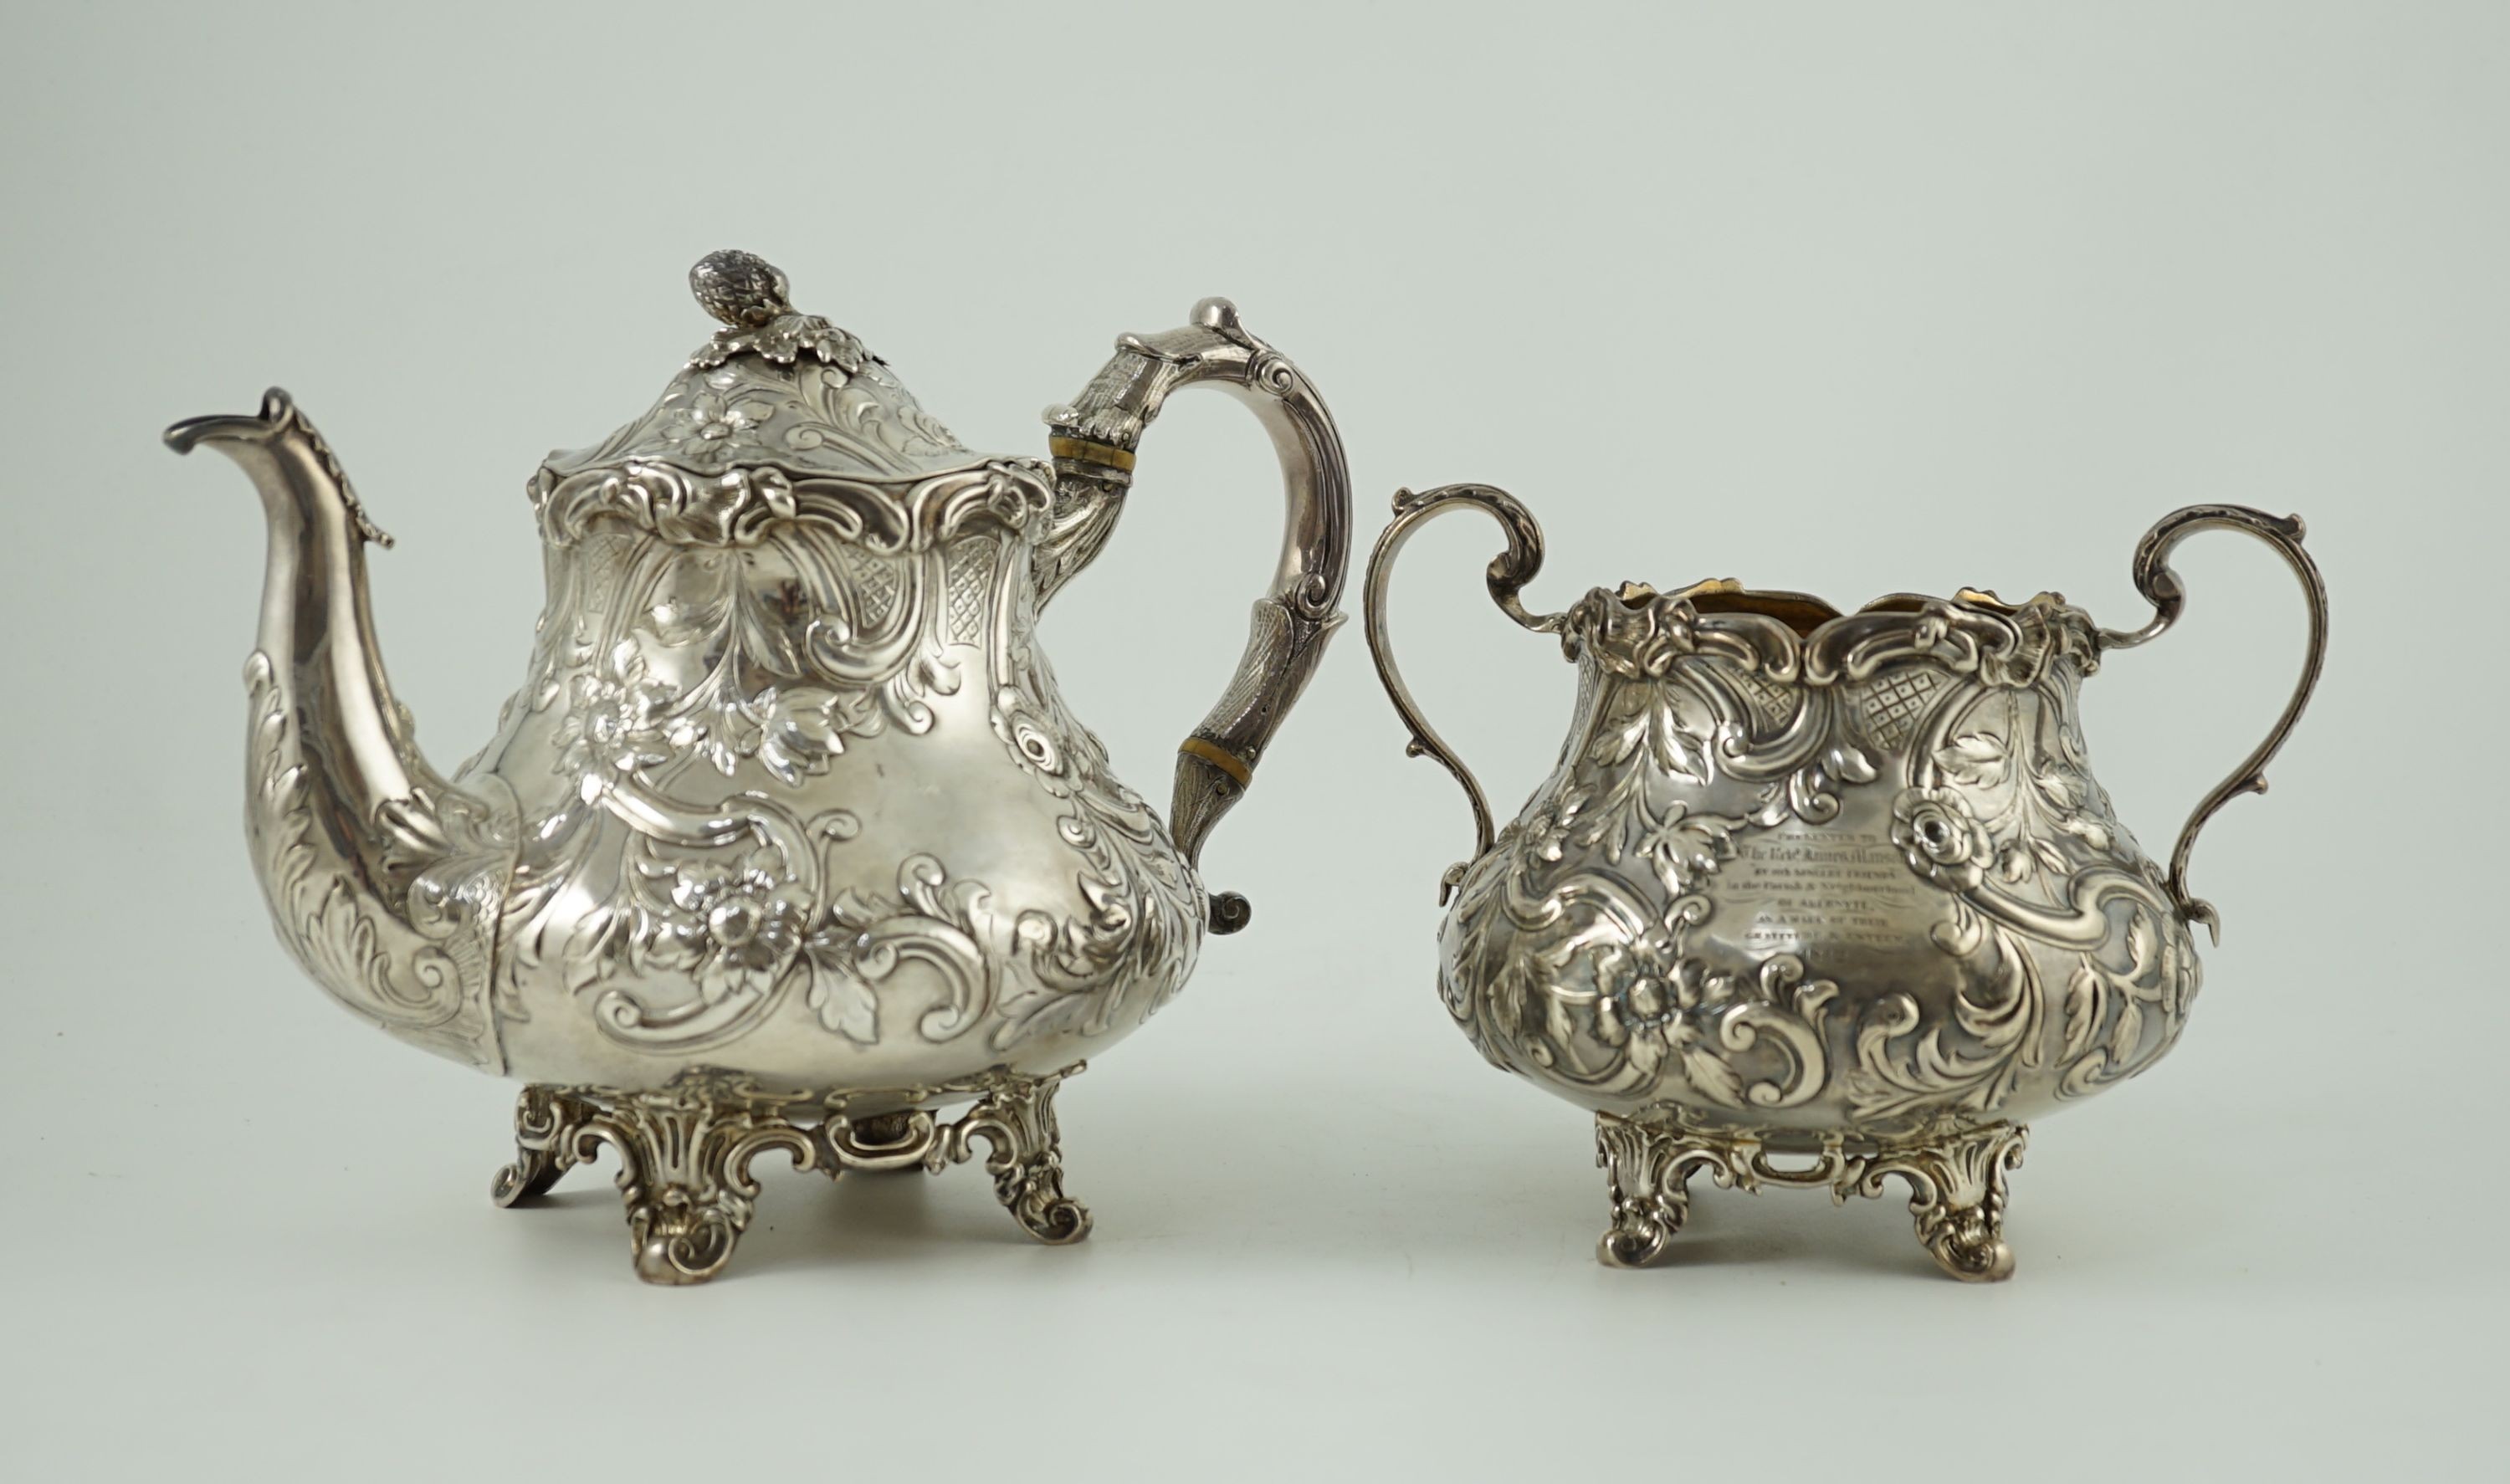 An early Victorian silver teapot and matching sugar bowl, by John Wellby